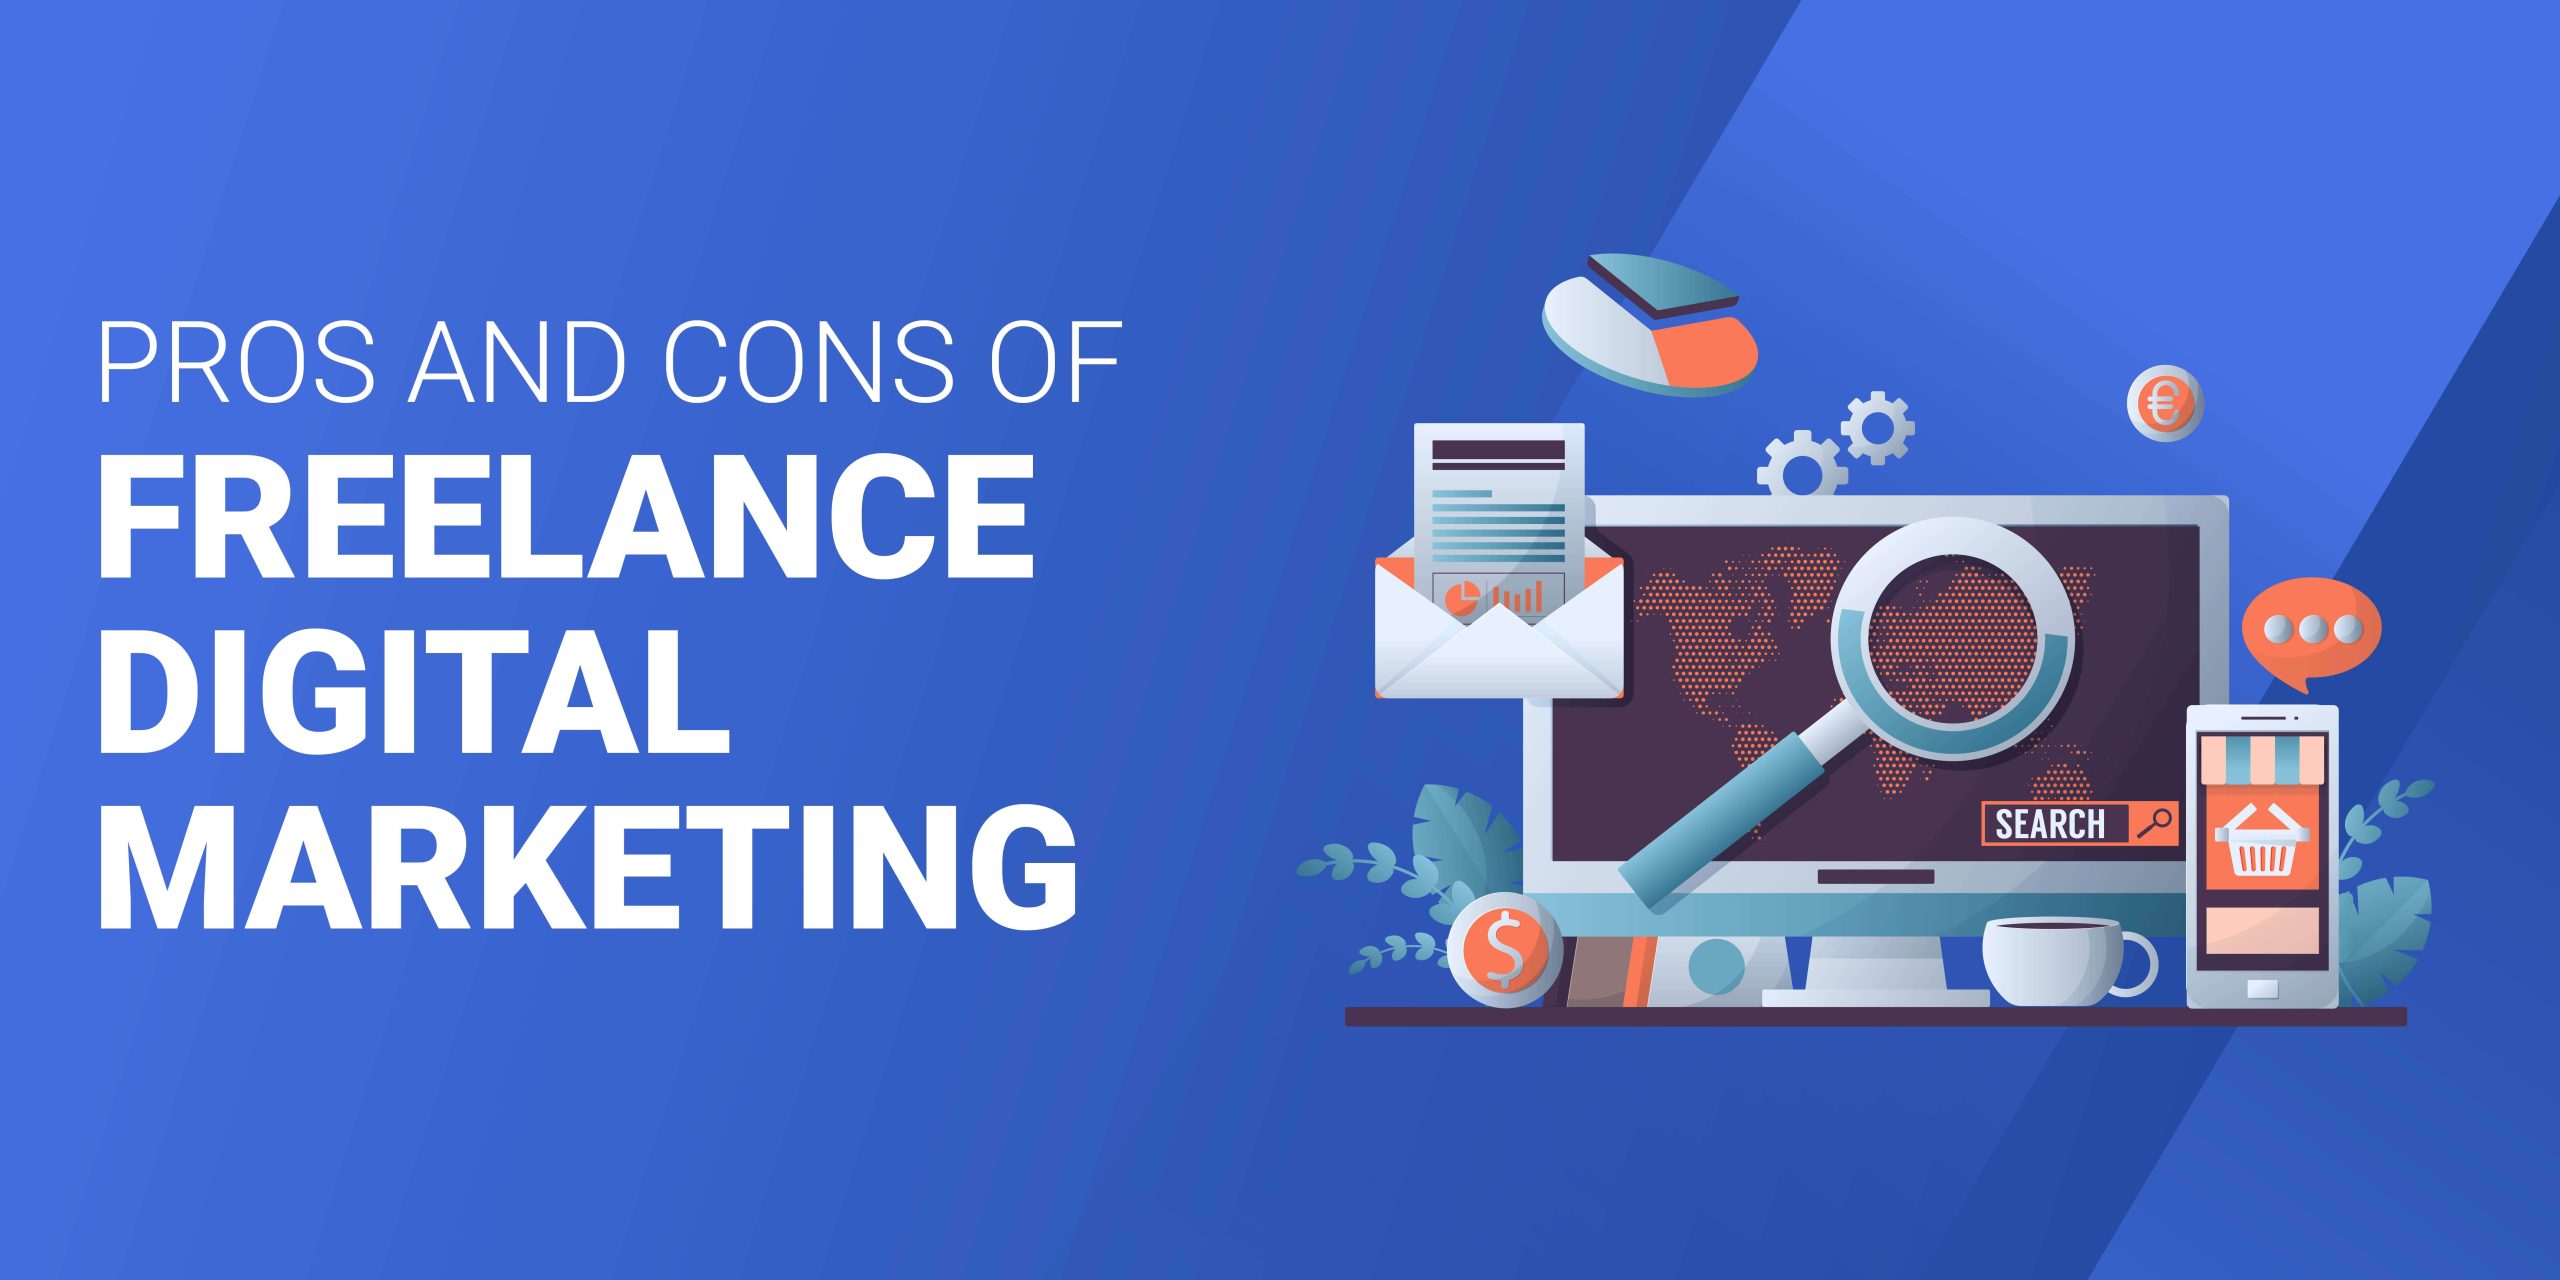 pros and cons of freelance digital marketing